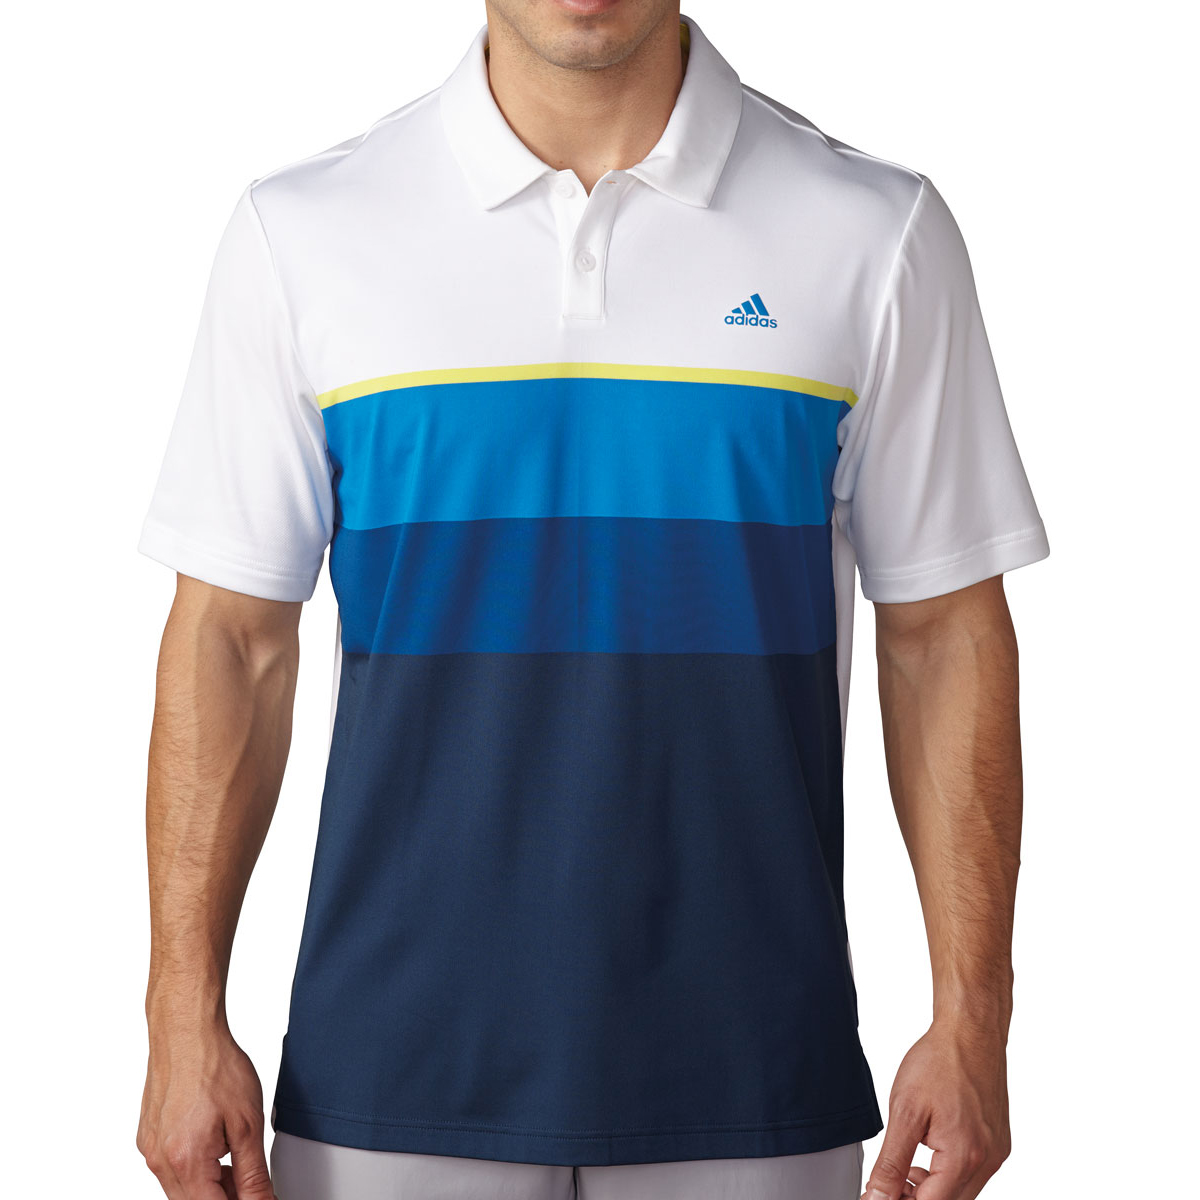 adidas Golf climacool Engineered Striped Polo Shirt from american golf